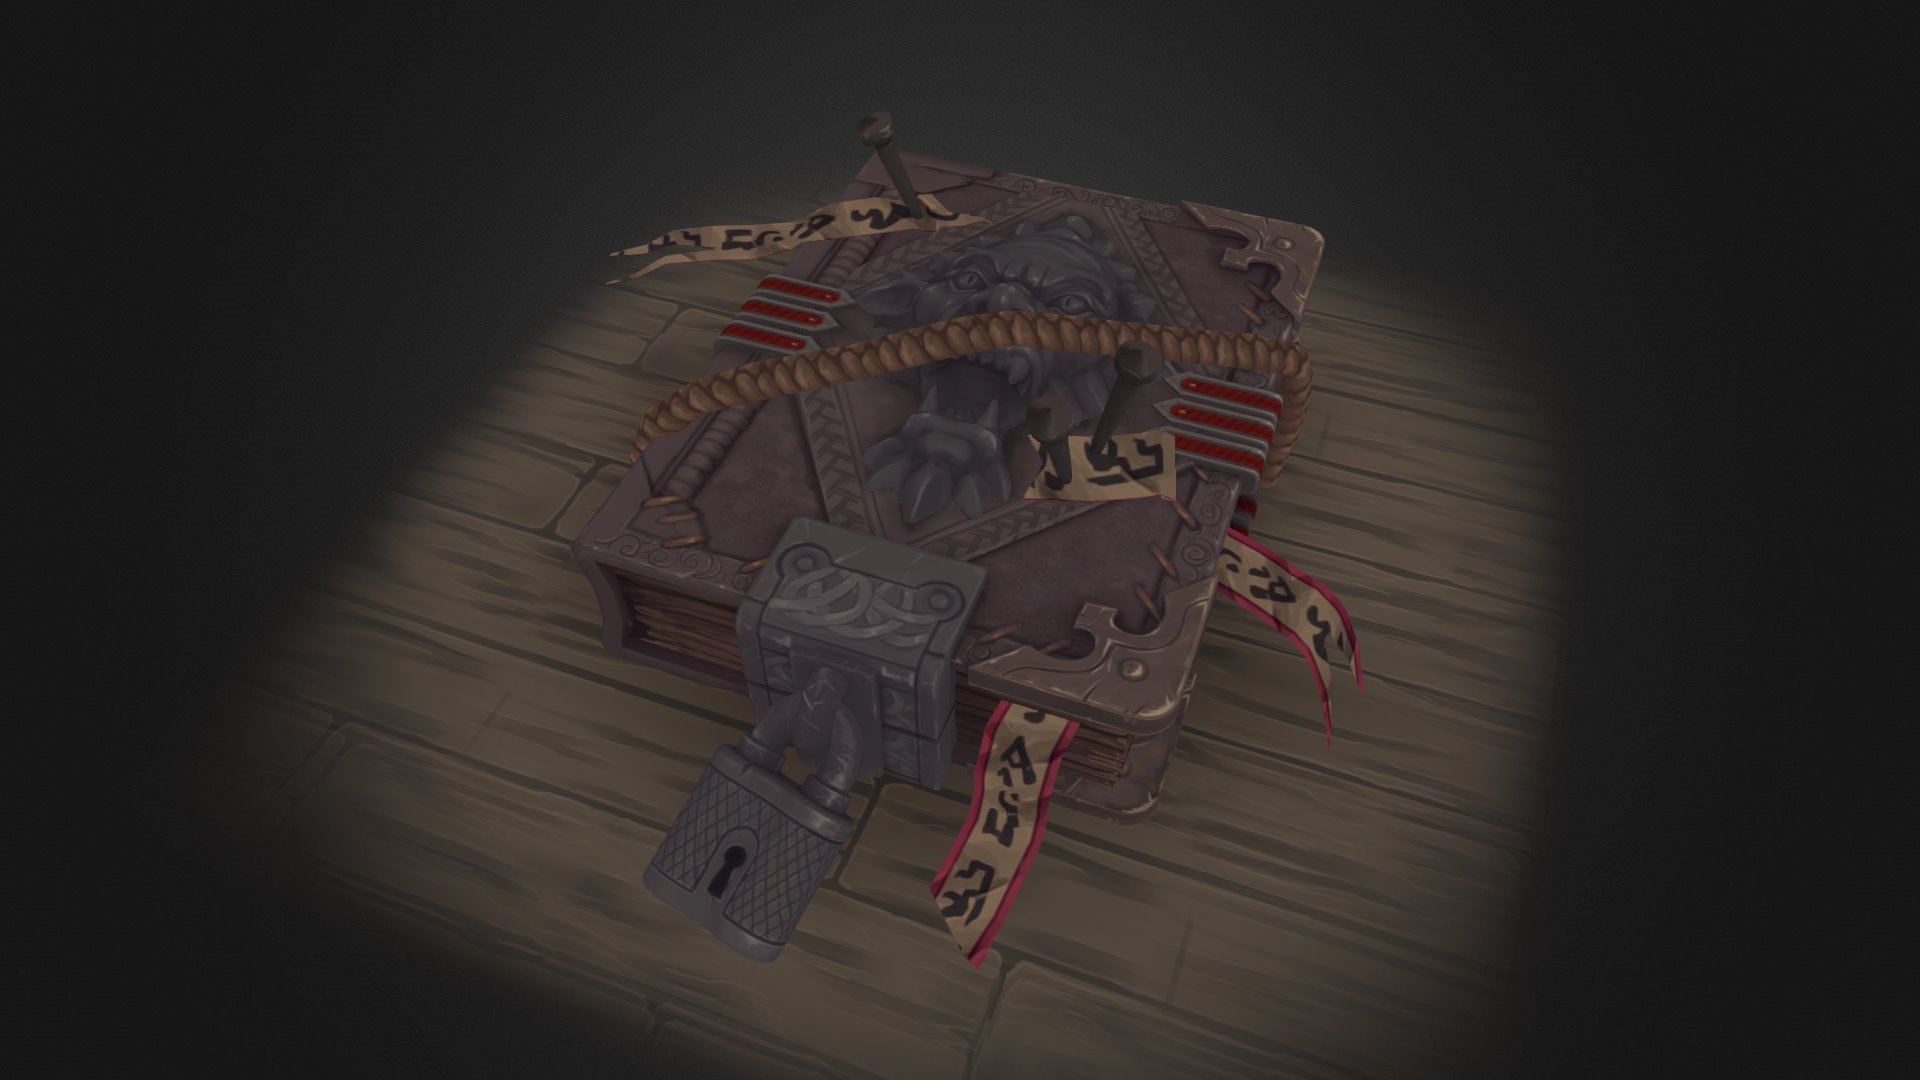 A Spellbook based on this artwork.

I wanted to do a fantasy item with a handpainted texture and absolutely loved the drawing! Took me quite a while in my free time, but I'm happy with the result.

Diffuse only, one 2048x2048 texture 3d model